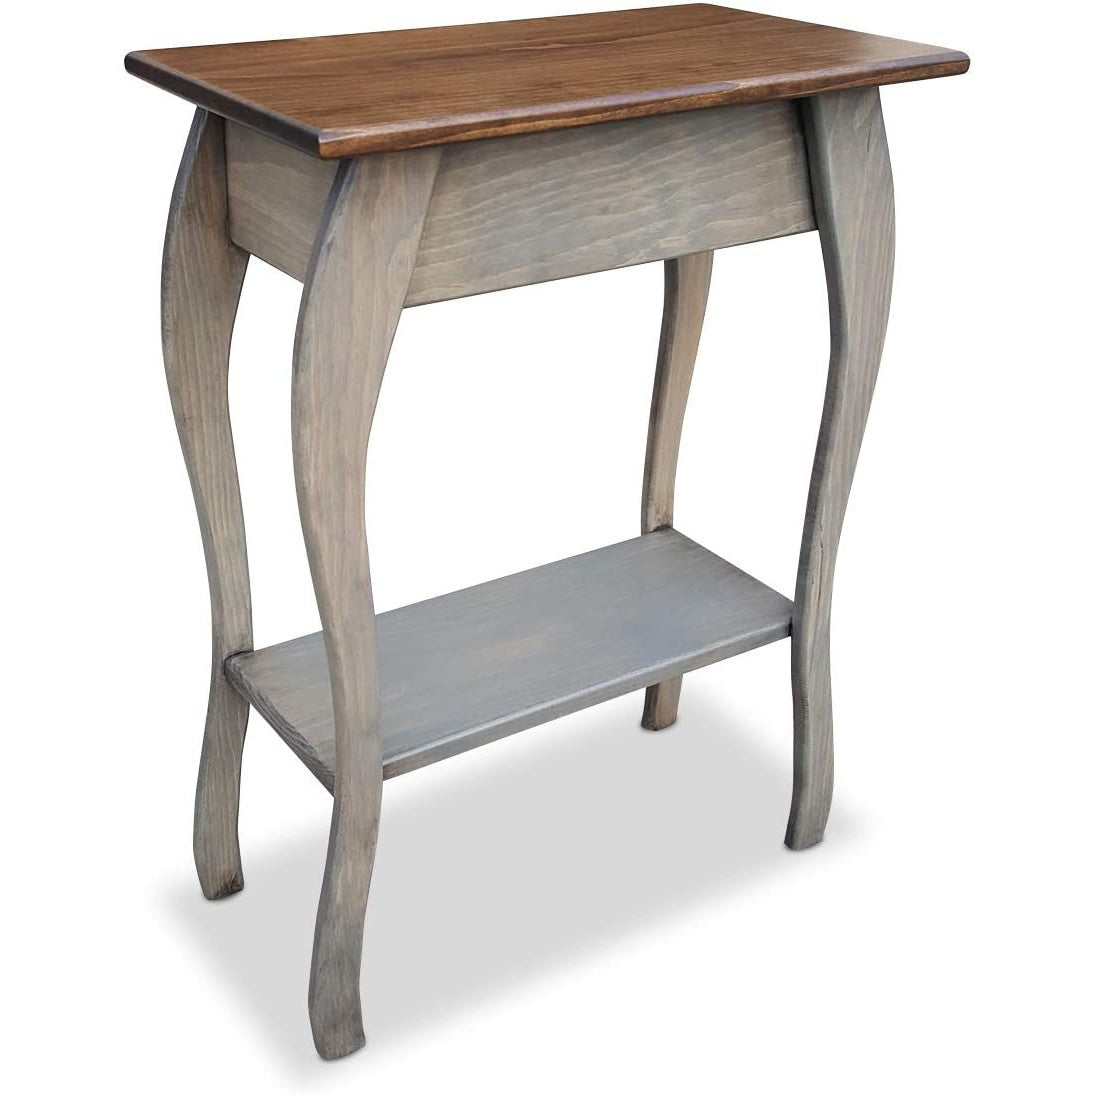 Slim Wooden End Table Amish Furniture | Thin Narrow Side Tables for Living Room, Hallway, or Nightstand-Peaceful Classics